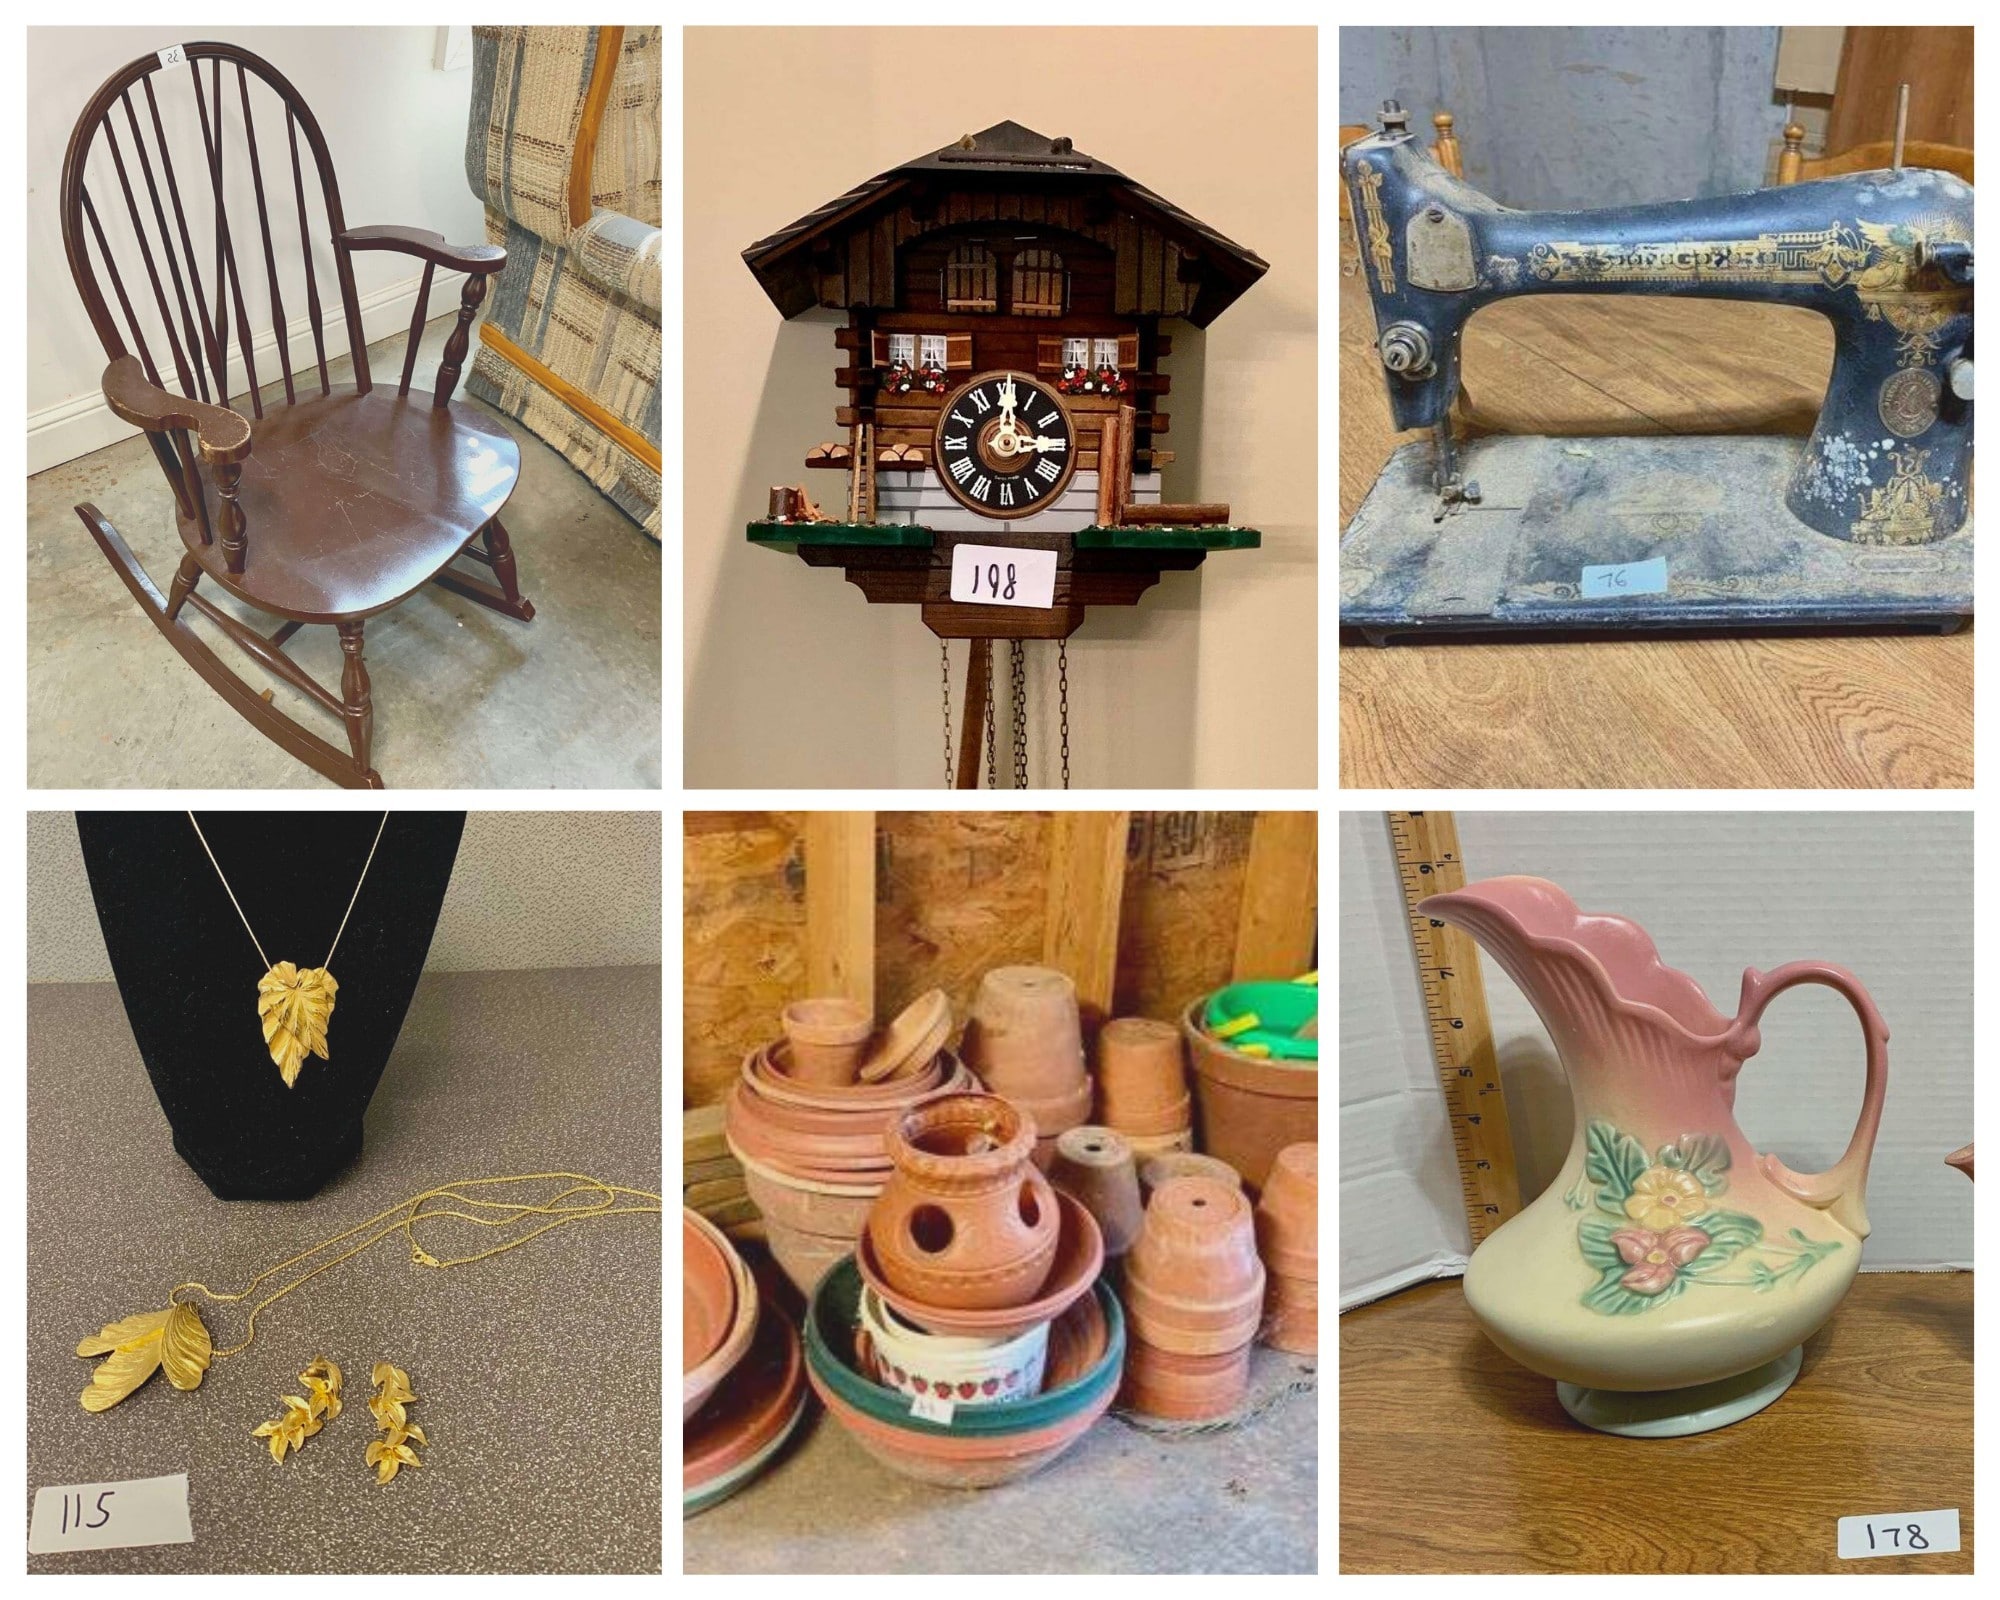 Antique Furnitures and Decorations in Good Condition